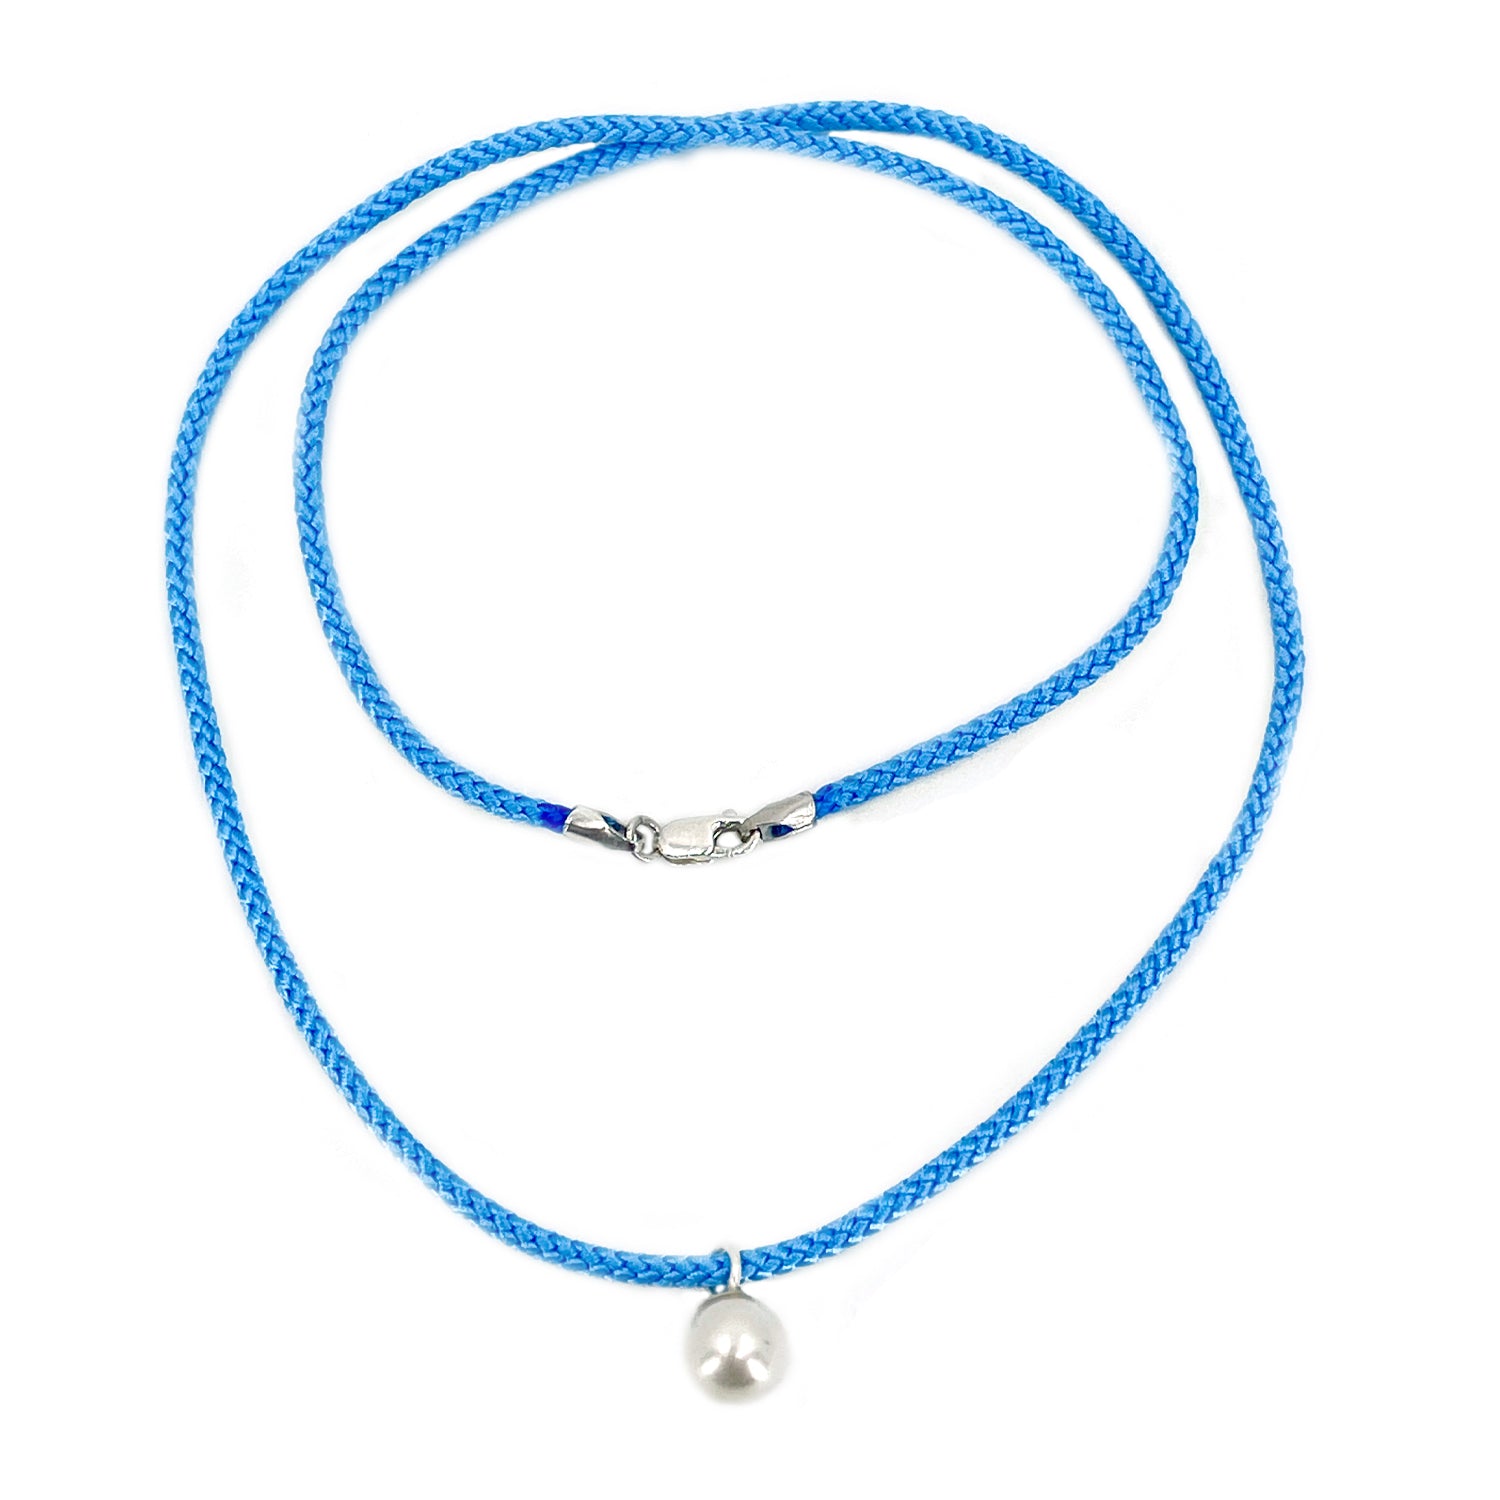 Kumihimo Braided Sea Blue Silk Vintage Akoya Saltwater Cultured Pearl Necklace-Sterling Silver 18 Inch